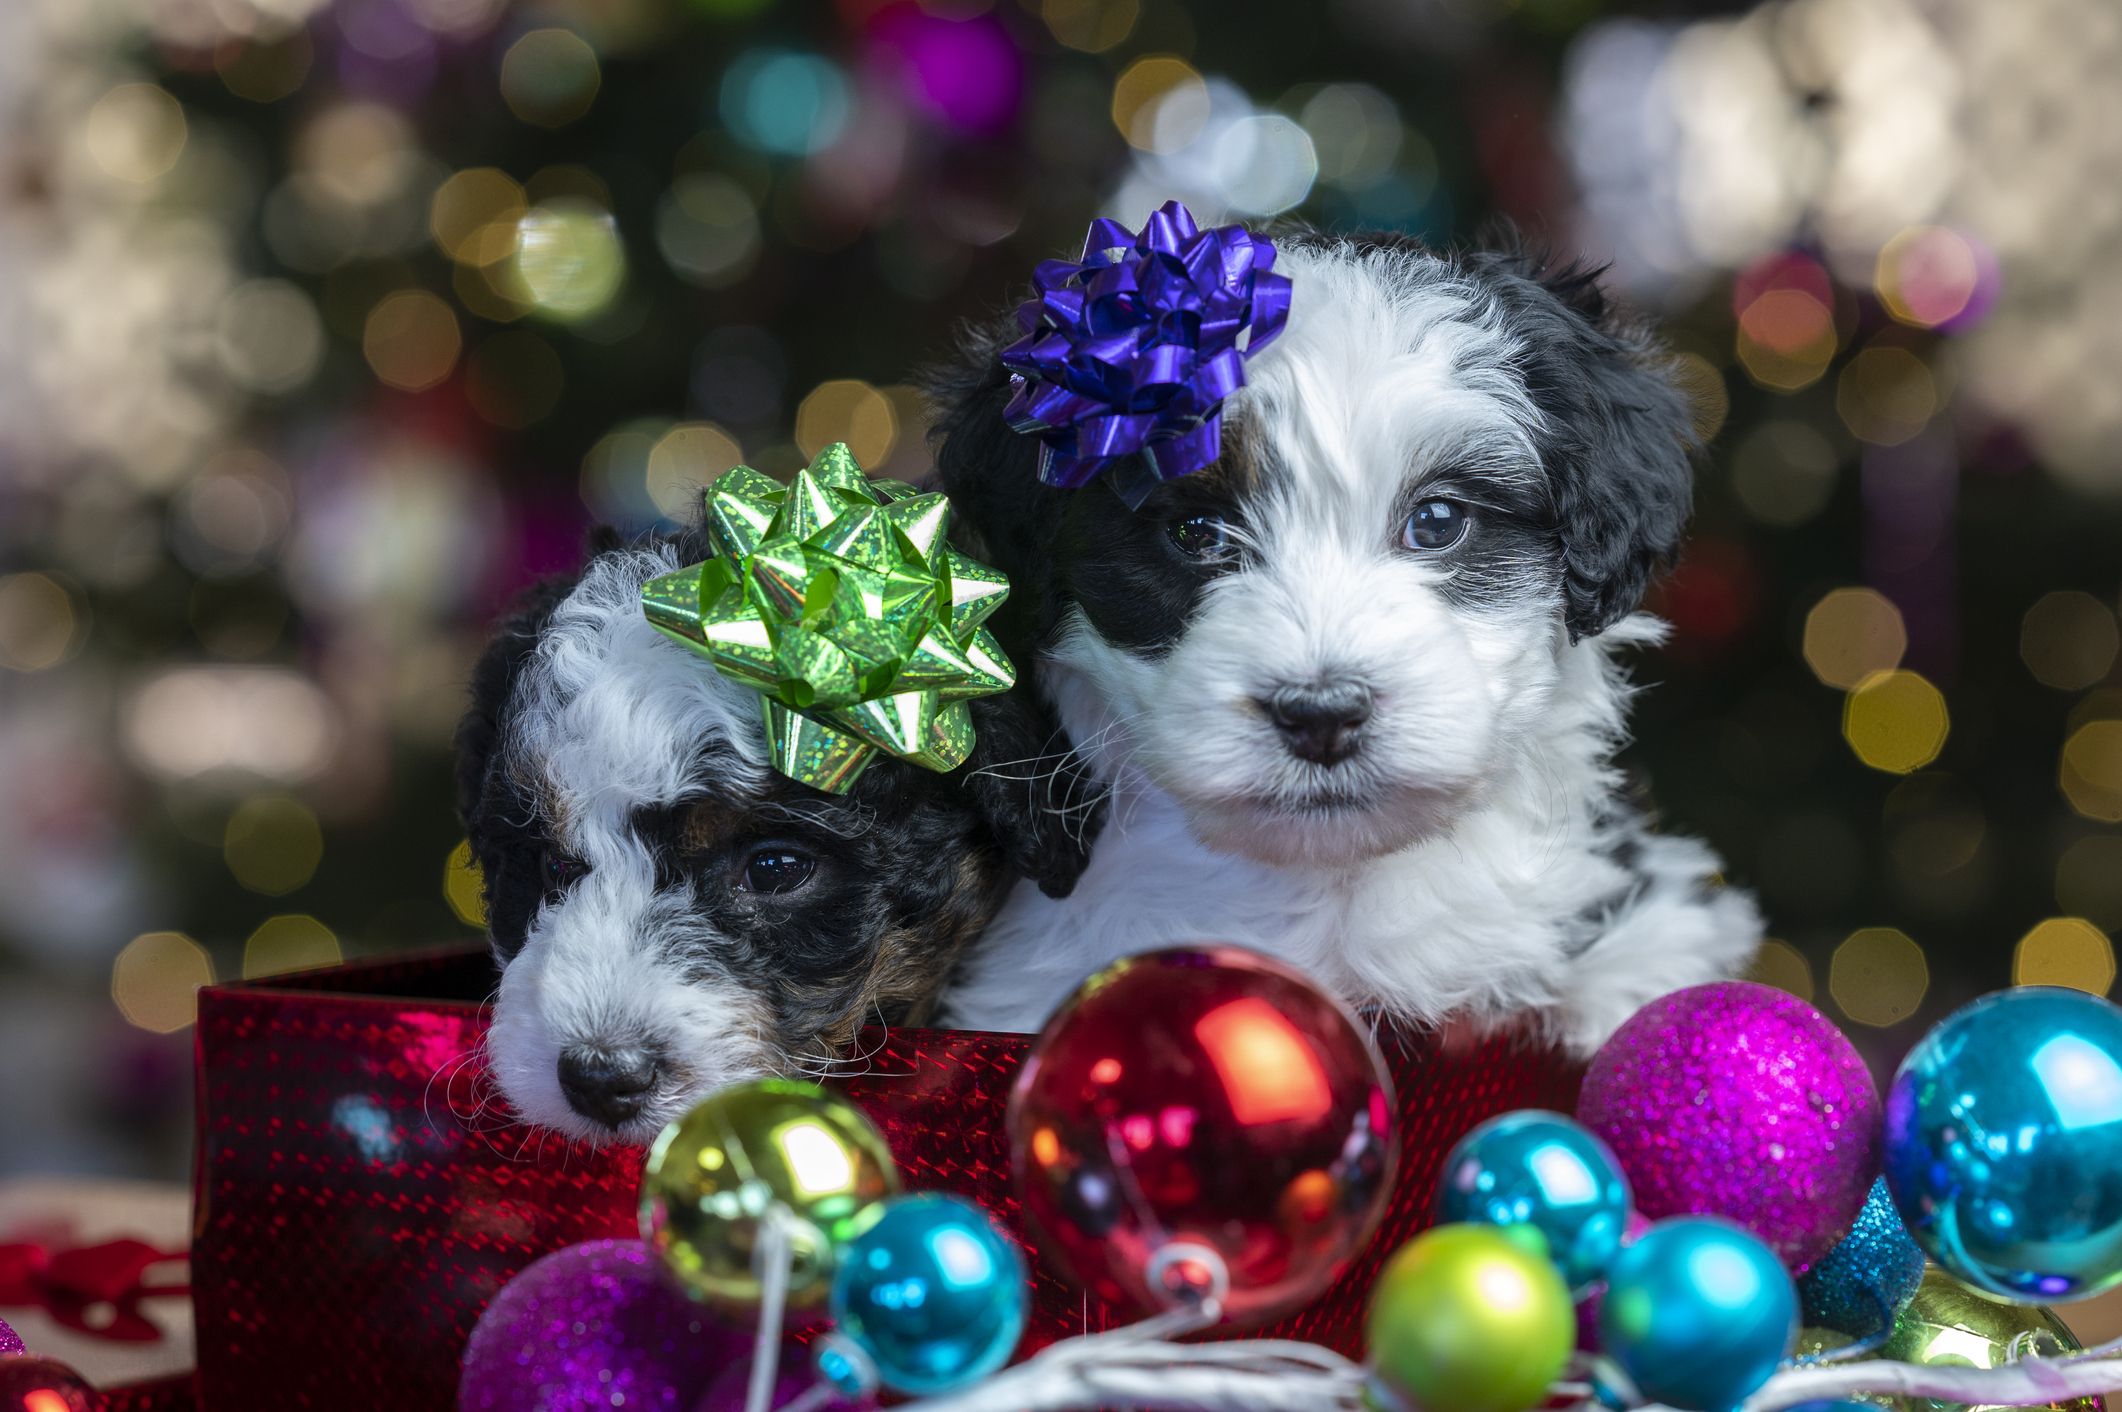 https://hips.hearstapps.com/hmg-prod/images/two-adorable-bernedoodle-puppies-in-a-holiday-gift-royalty-free-image-1699288217.jpg